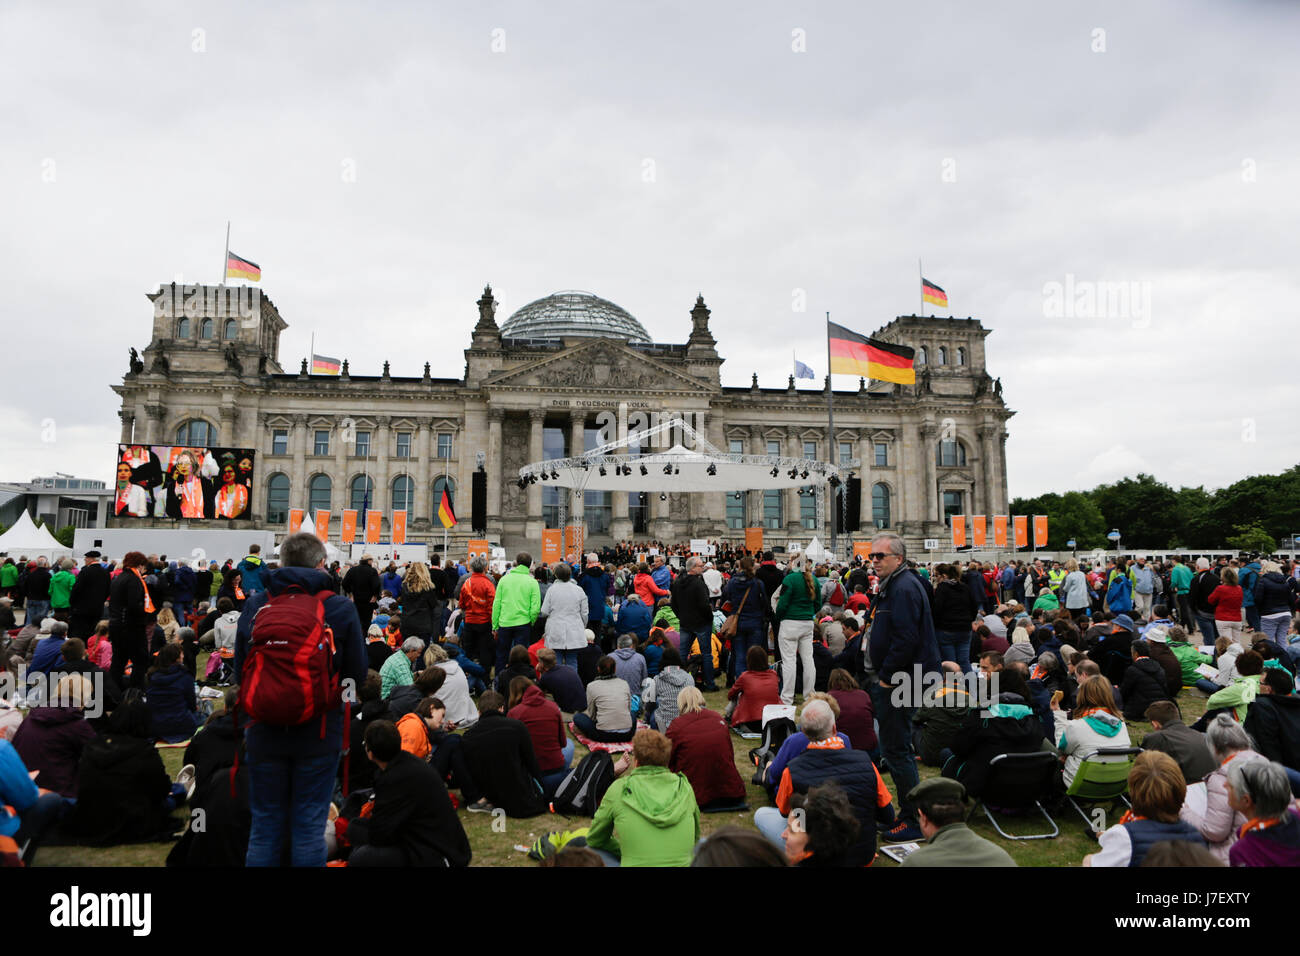 Berlin, Germany. 24th May 2017. People have assembled outside the Reichstags building for one of the three opening services. Tens of thousands of people attended the opening services of the 36th German Protestant Church Congress (Evangelischer Kirchentag). The Congress is held from 24. to 28. May in Berlin and more than 100,000 visitors are expected to attend. The congress coincides with the 500. anniversary of the Reformation. Stock Photo